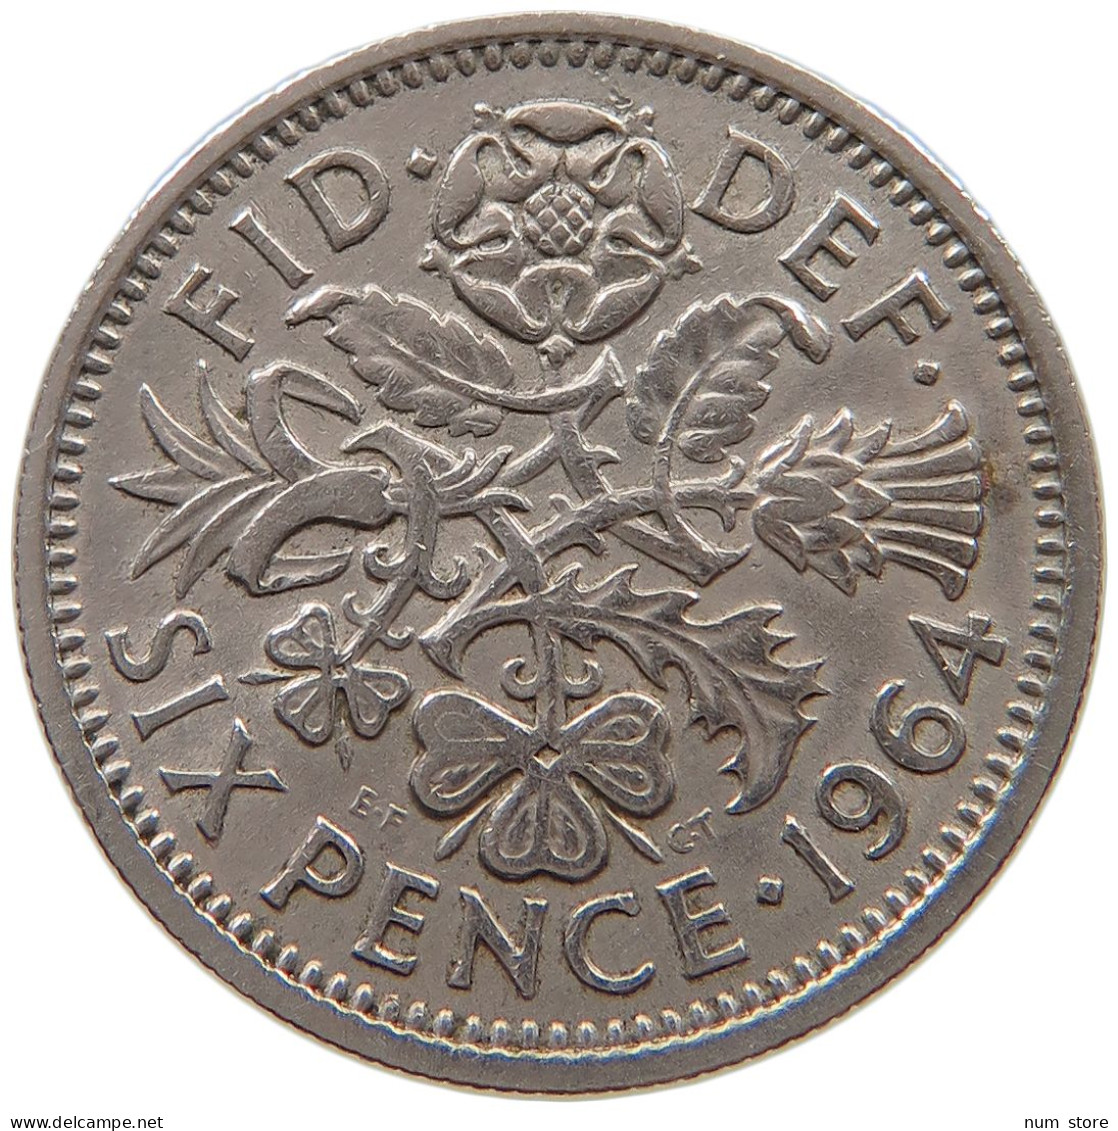 GREAT BRITAIN SIXPENCE 1964 #a061 0663 - H. 6 Pence